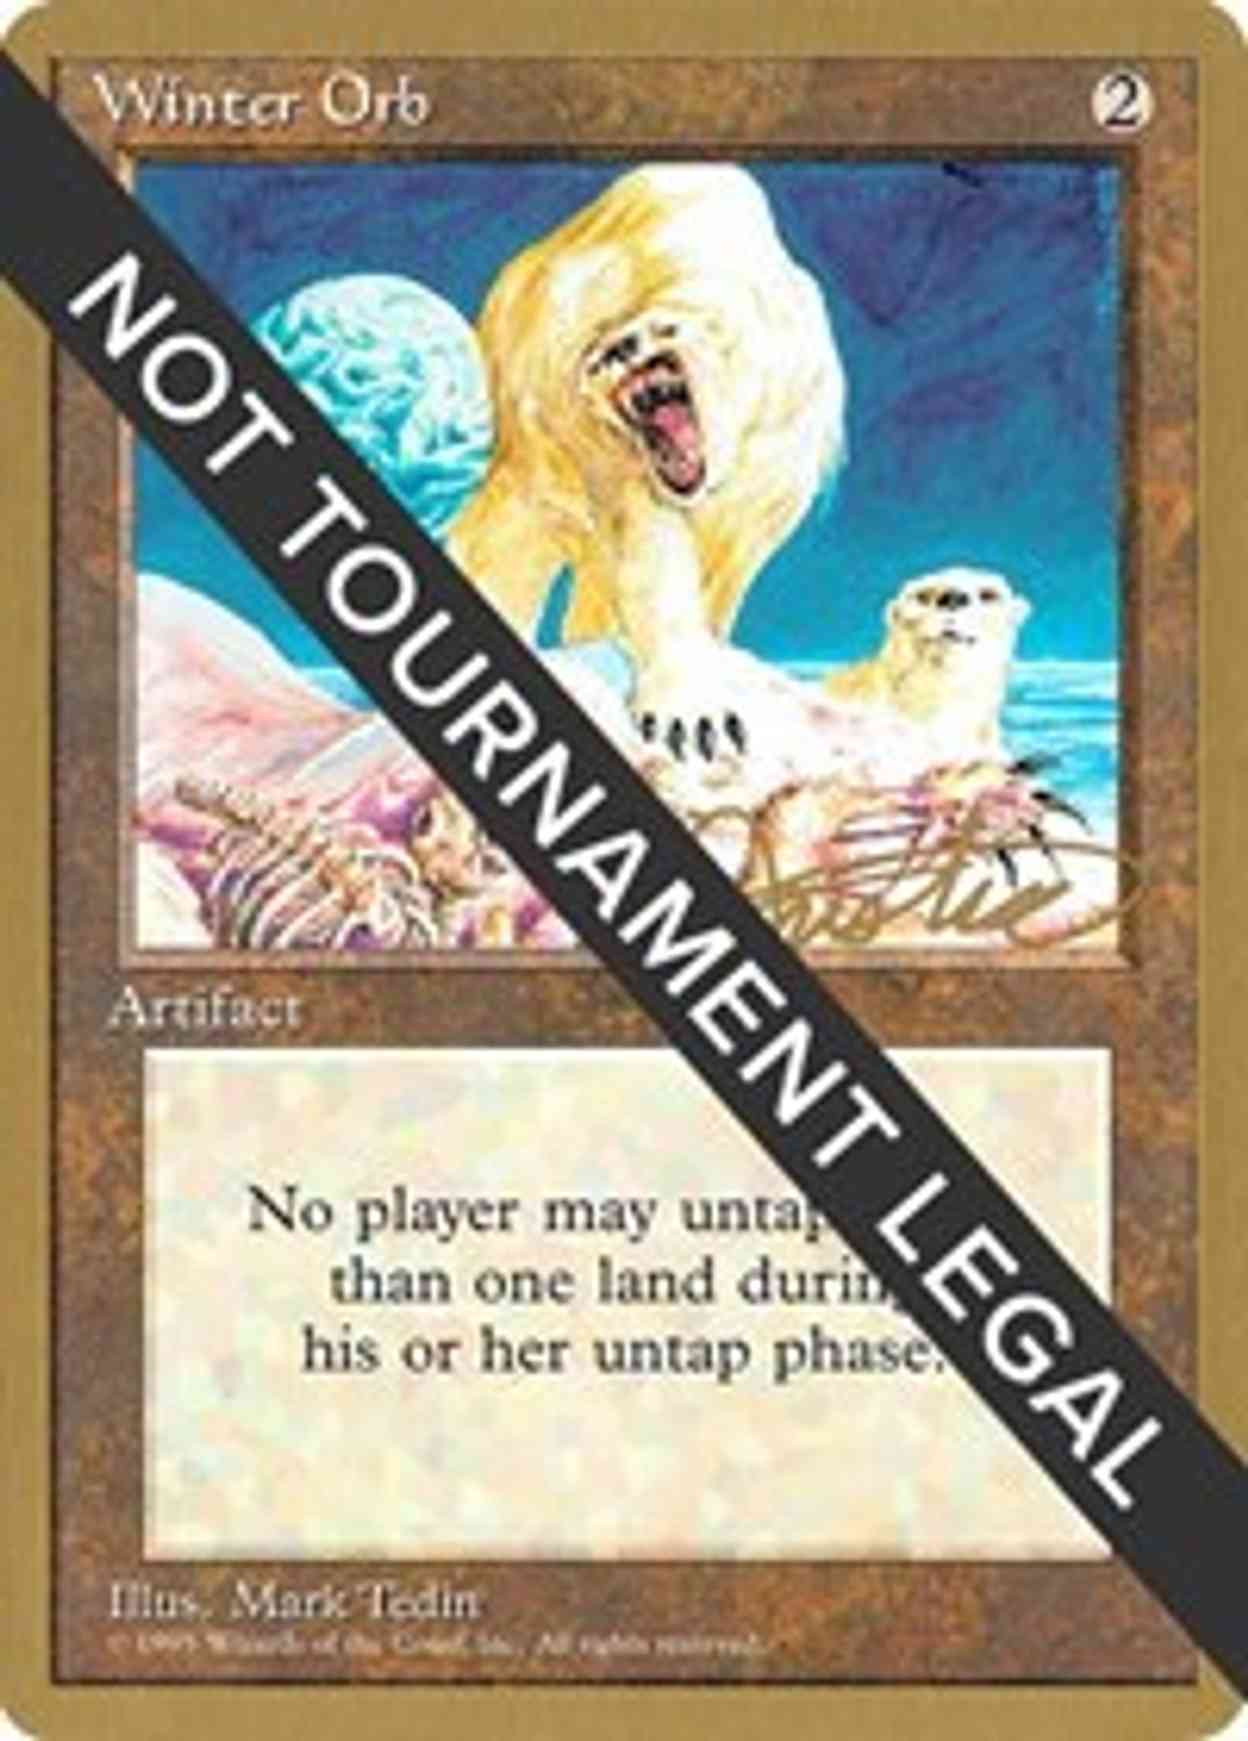 Winter Orb - 1996 Mark Justice (4ED) magic card front